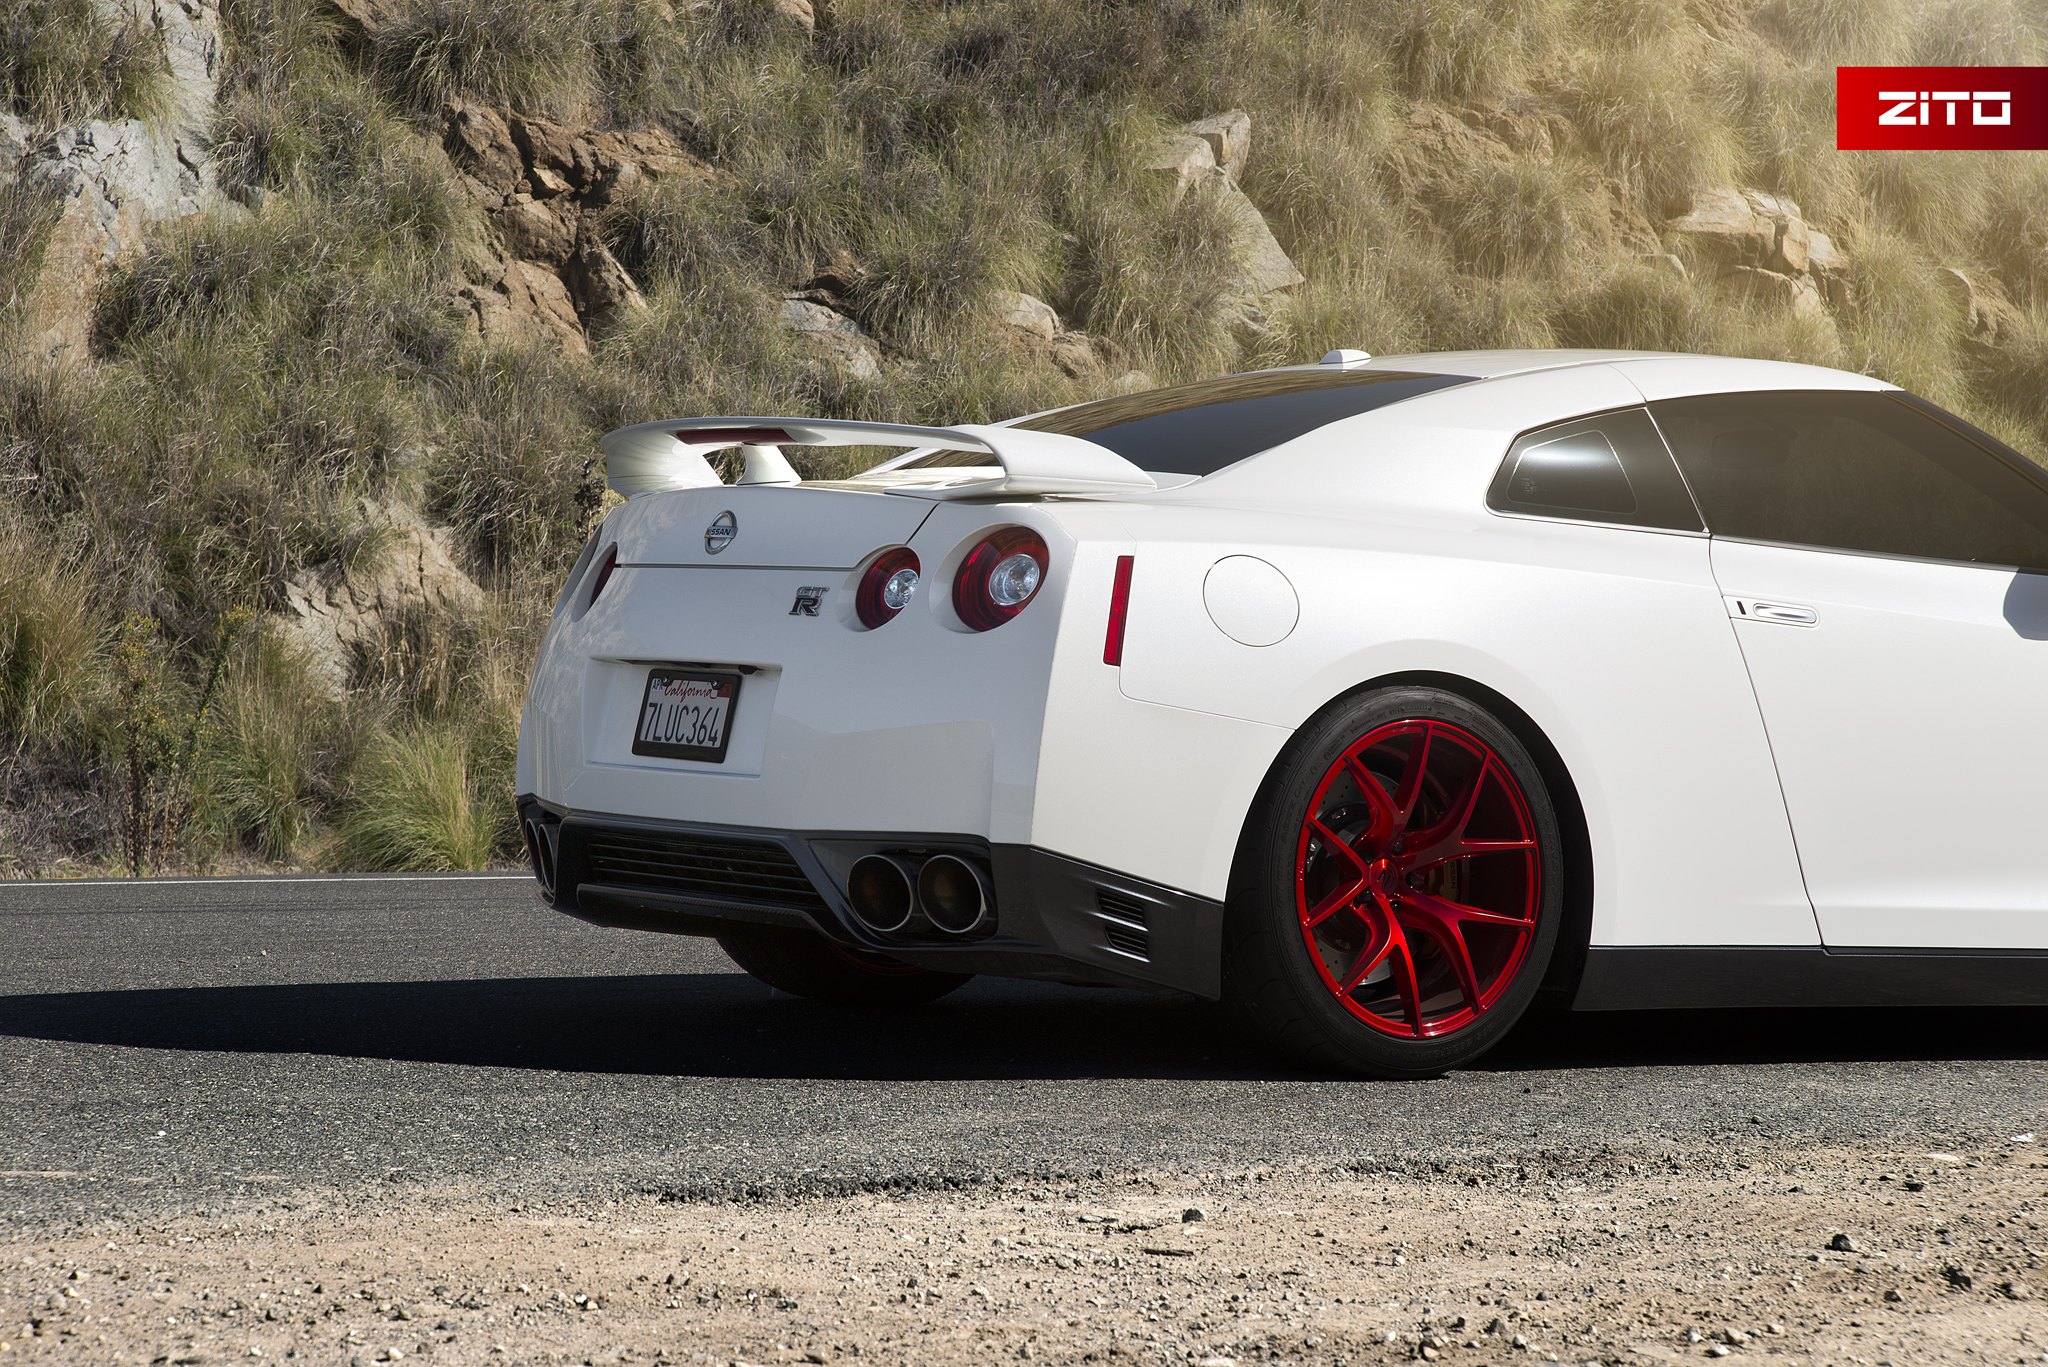 Red Clear LED Taillights on White Nissan GT-R - Photo by Zito Wheels